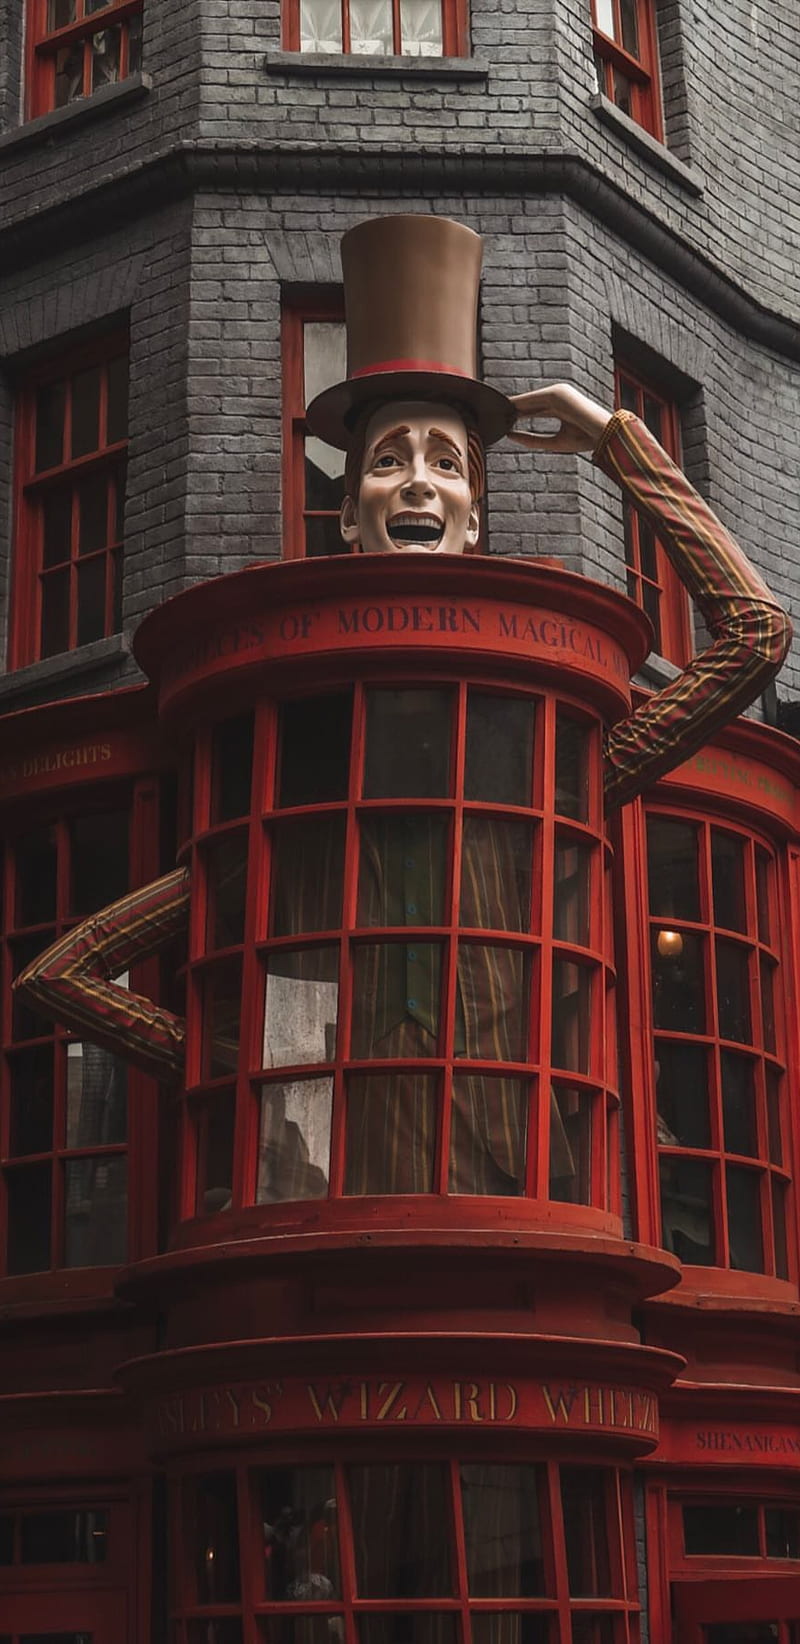 Join us for Early Night Live at Diagon Alley